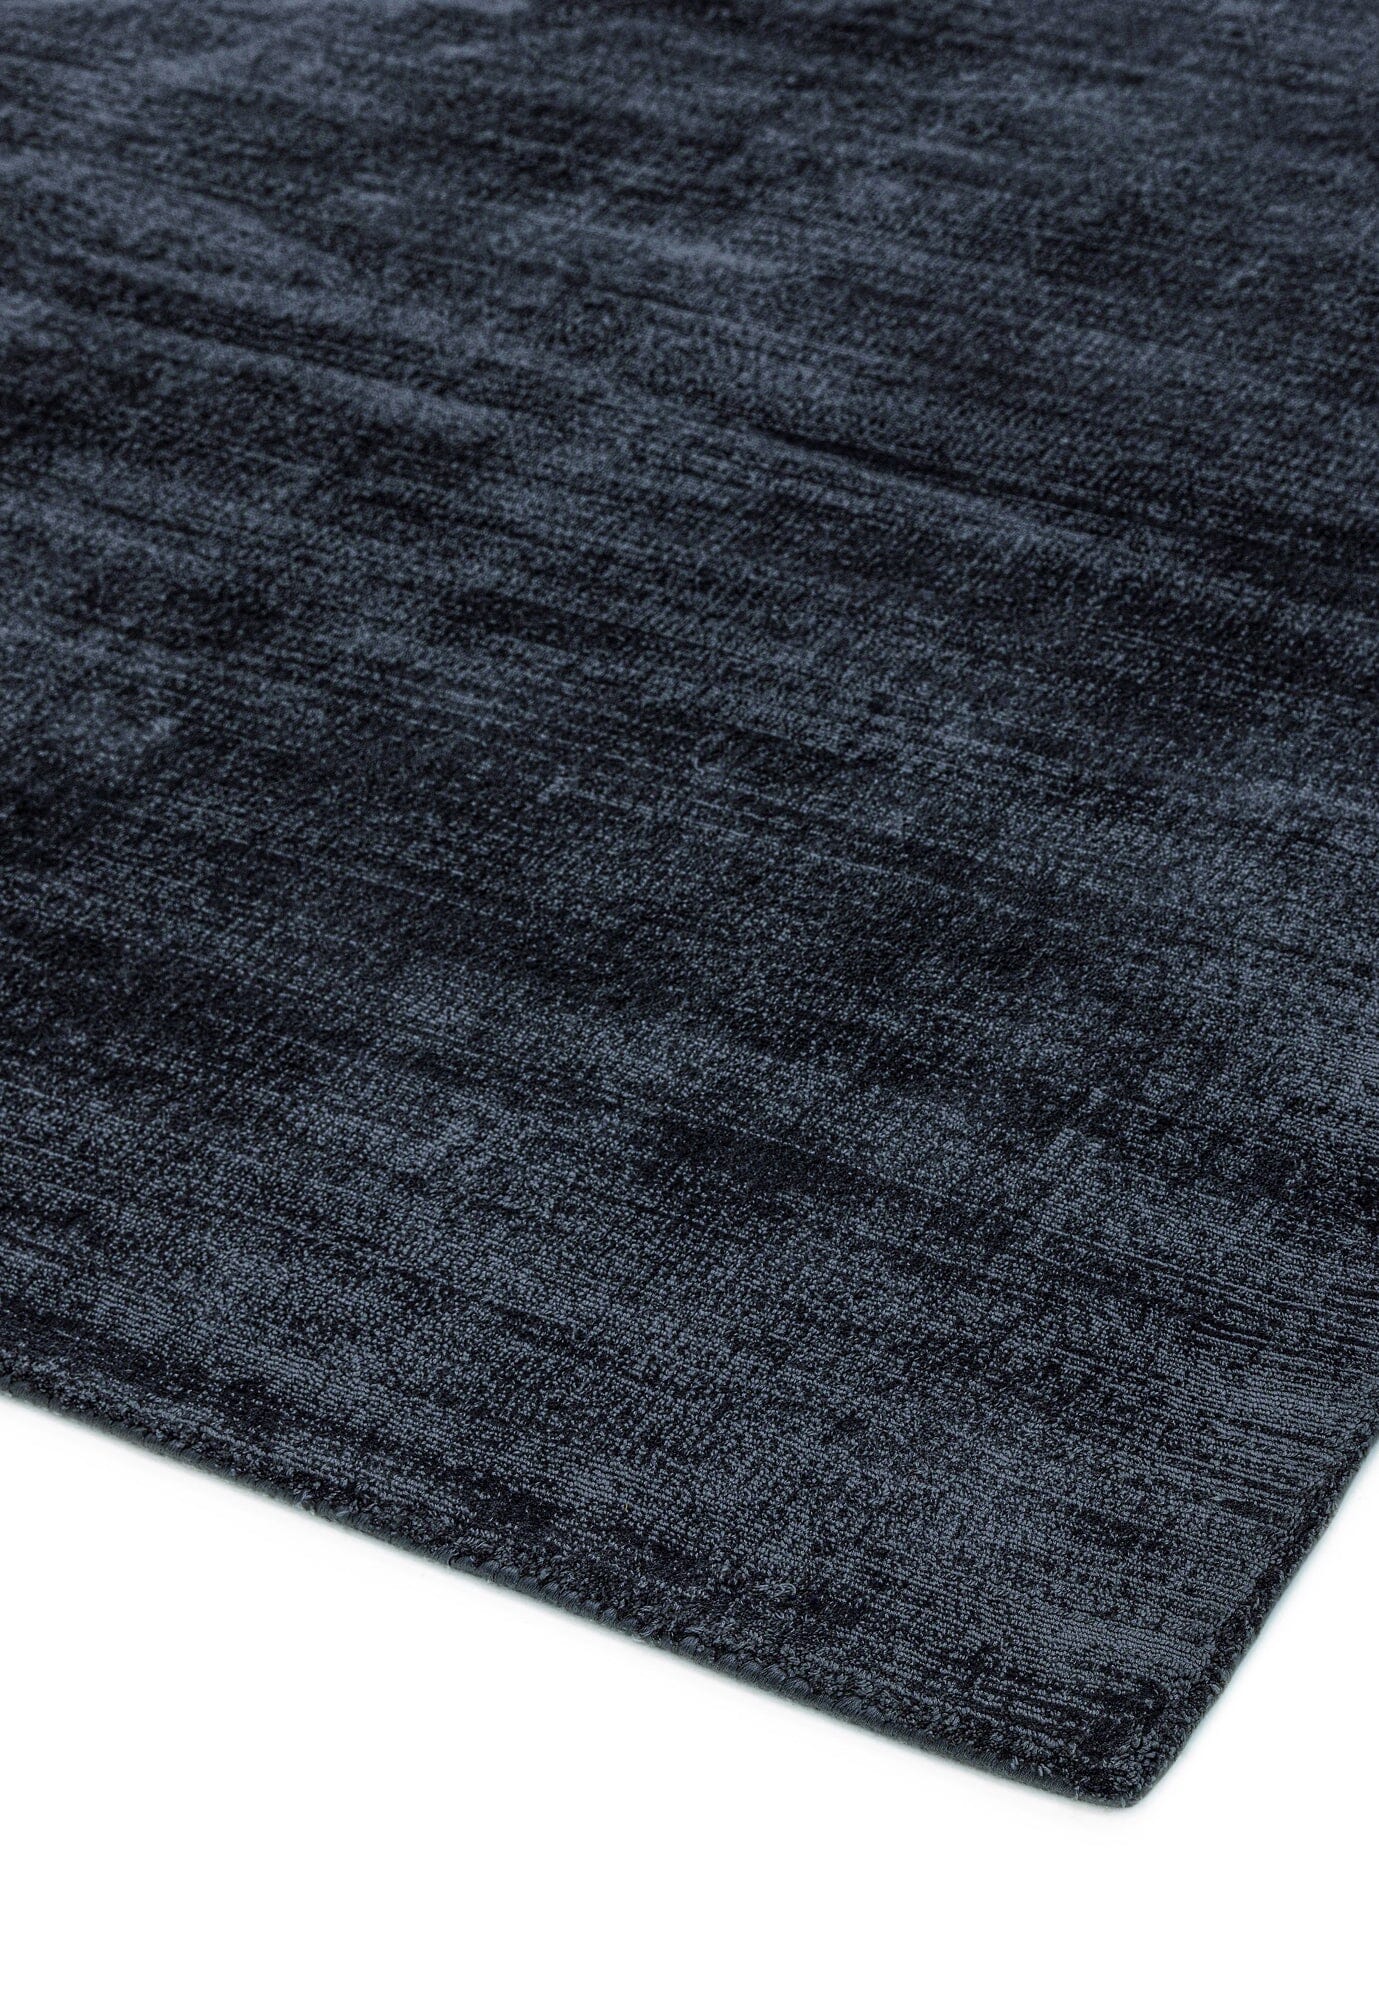  Asiatic Carpets-Asiatic Carpets Blade Hand Woven Rug Navy - 200 x 290cm-Blue 485 